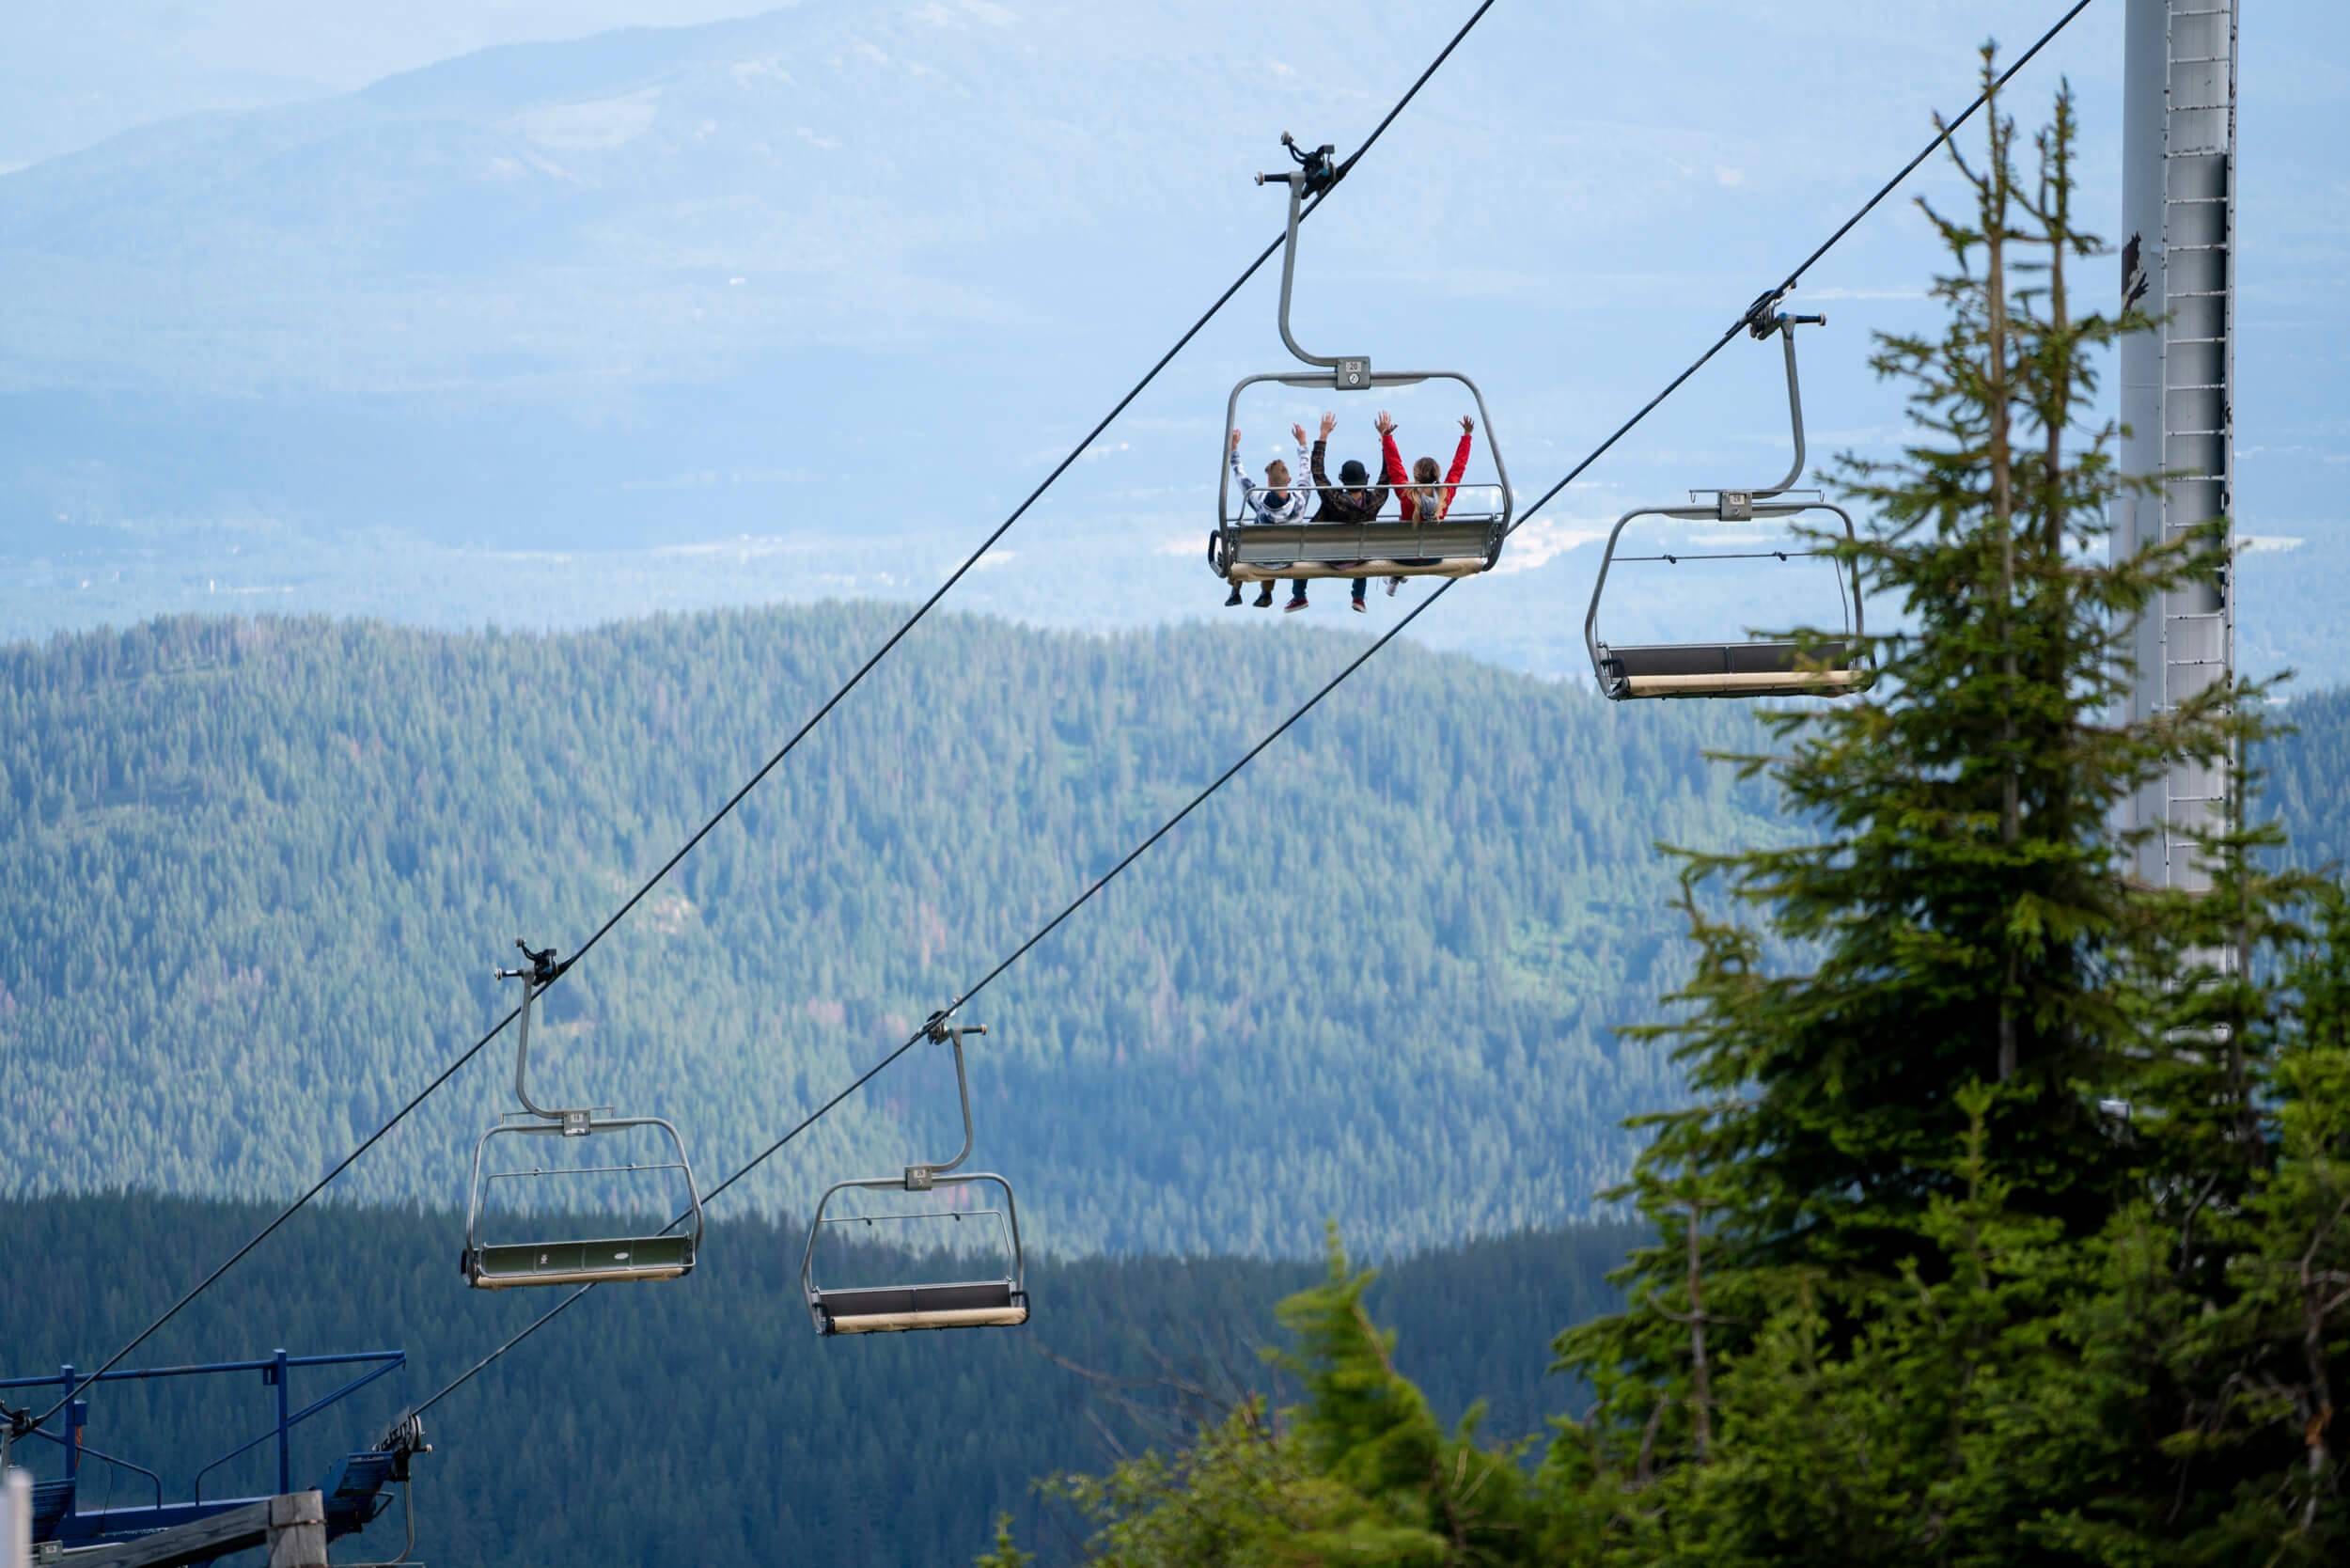 Three people ride a chairlift at a ski resort during the summer.